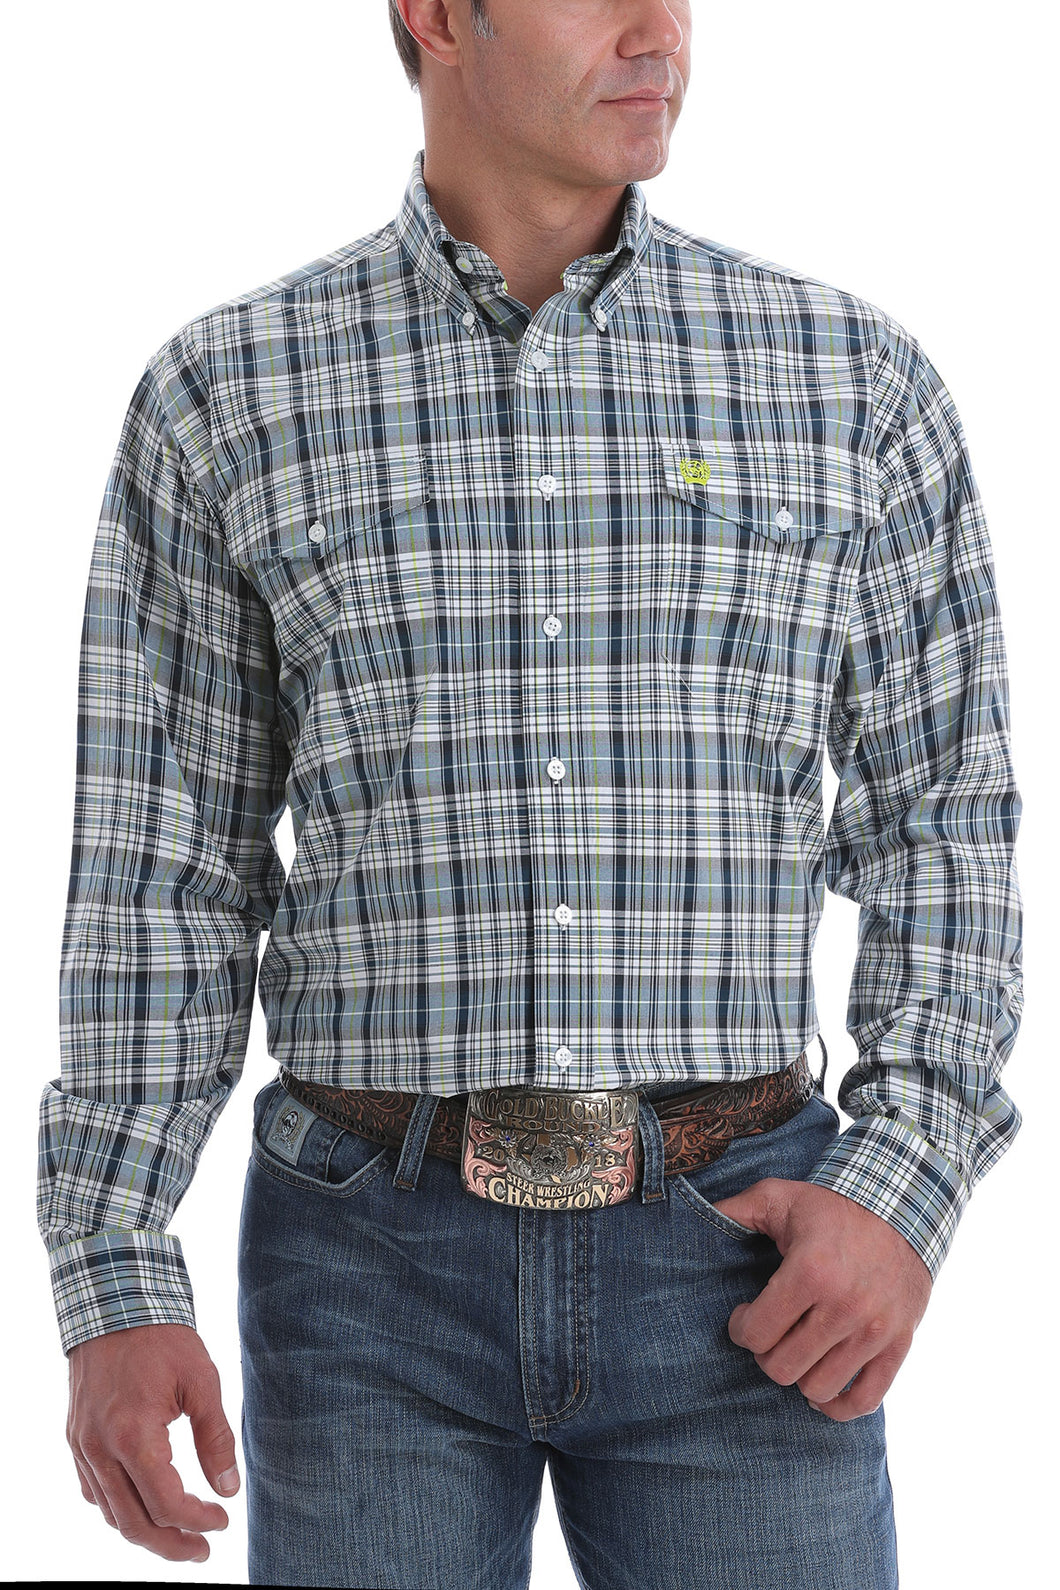 MEN'S NAVY, WHITE AND LIME PLAID DOUBLE POCKET BUTTON-DOWN WESTERN SHIRT